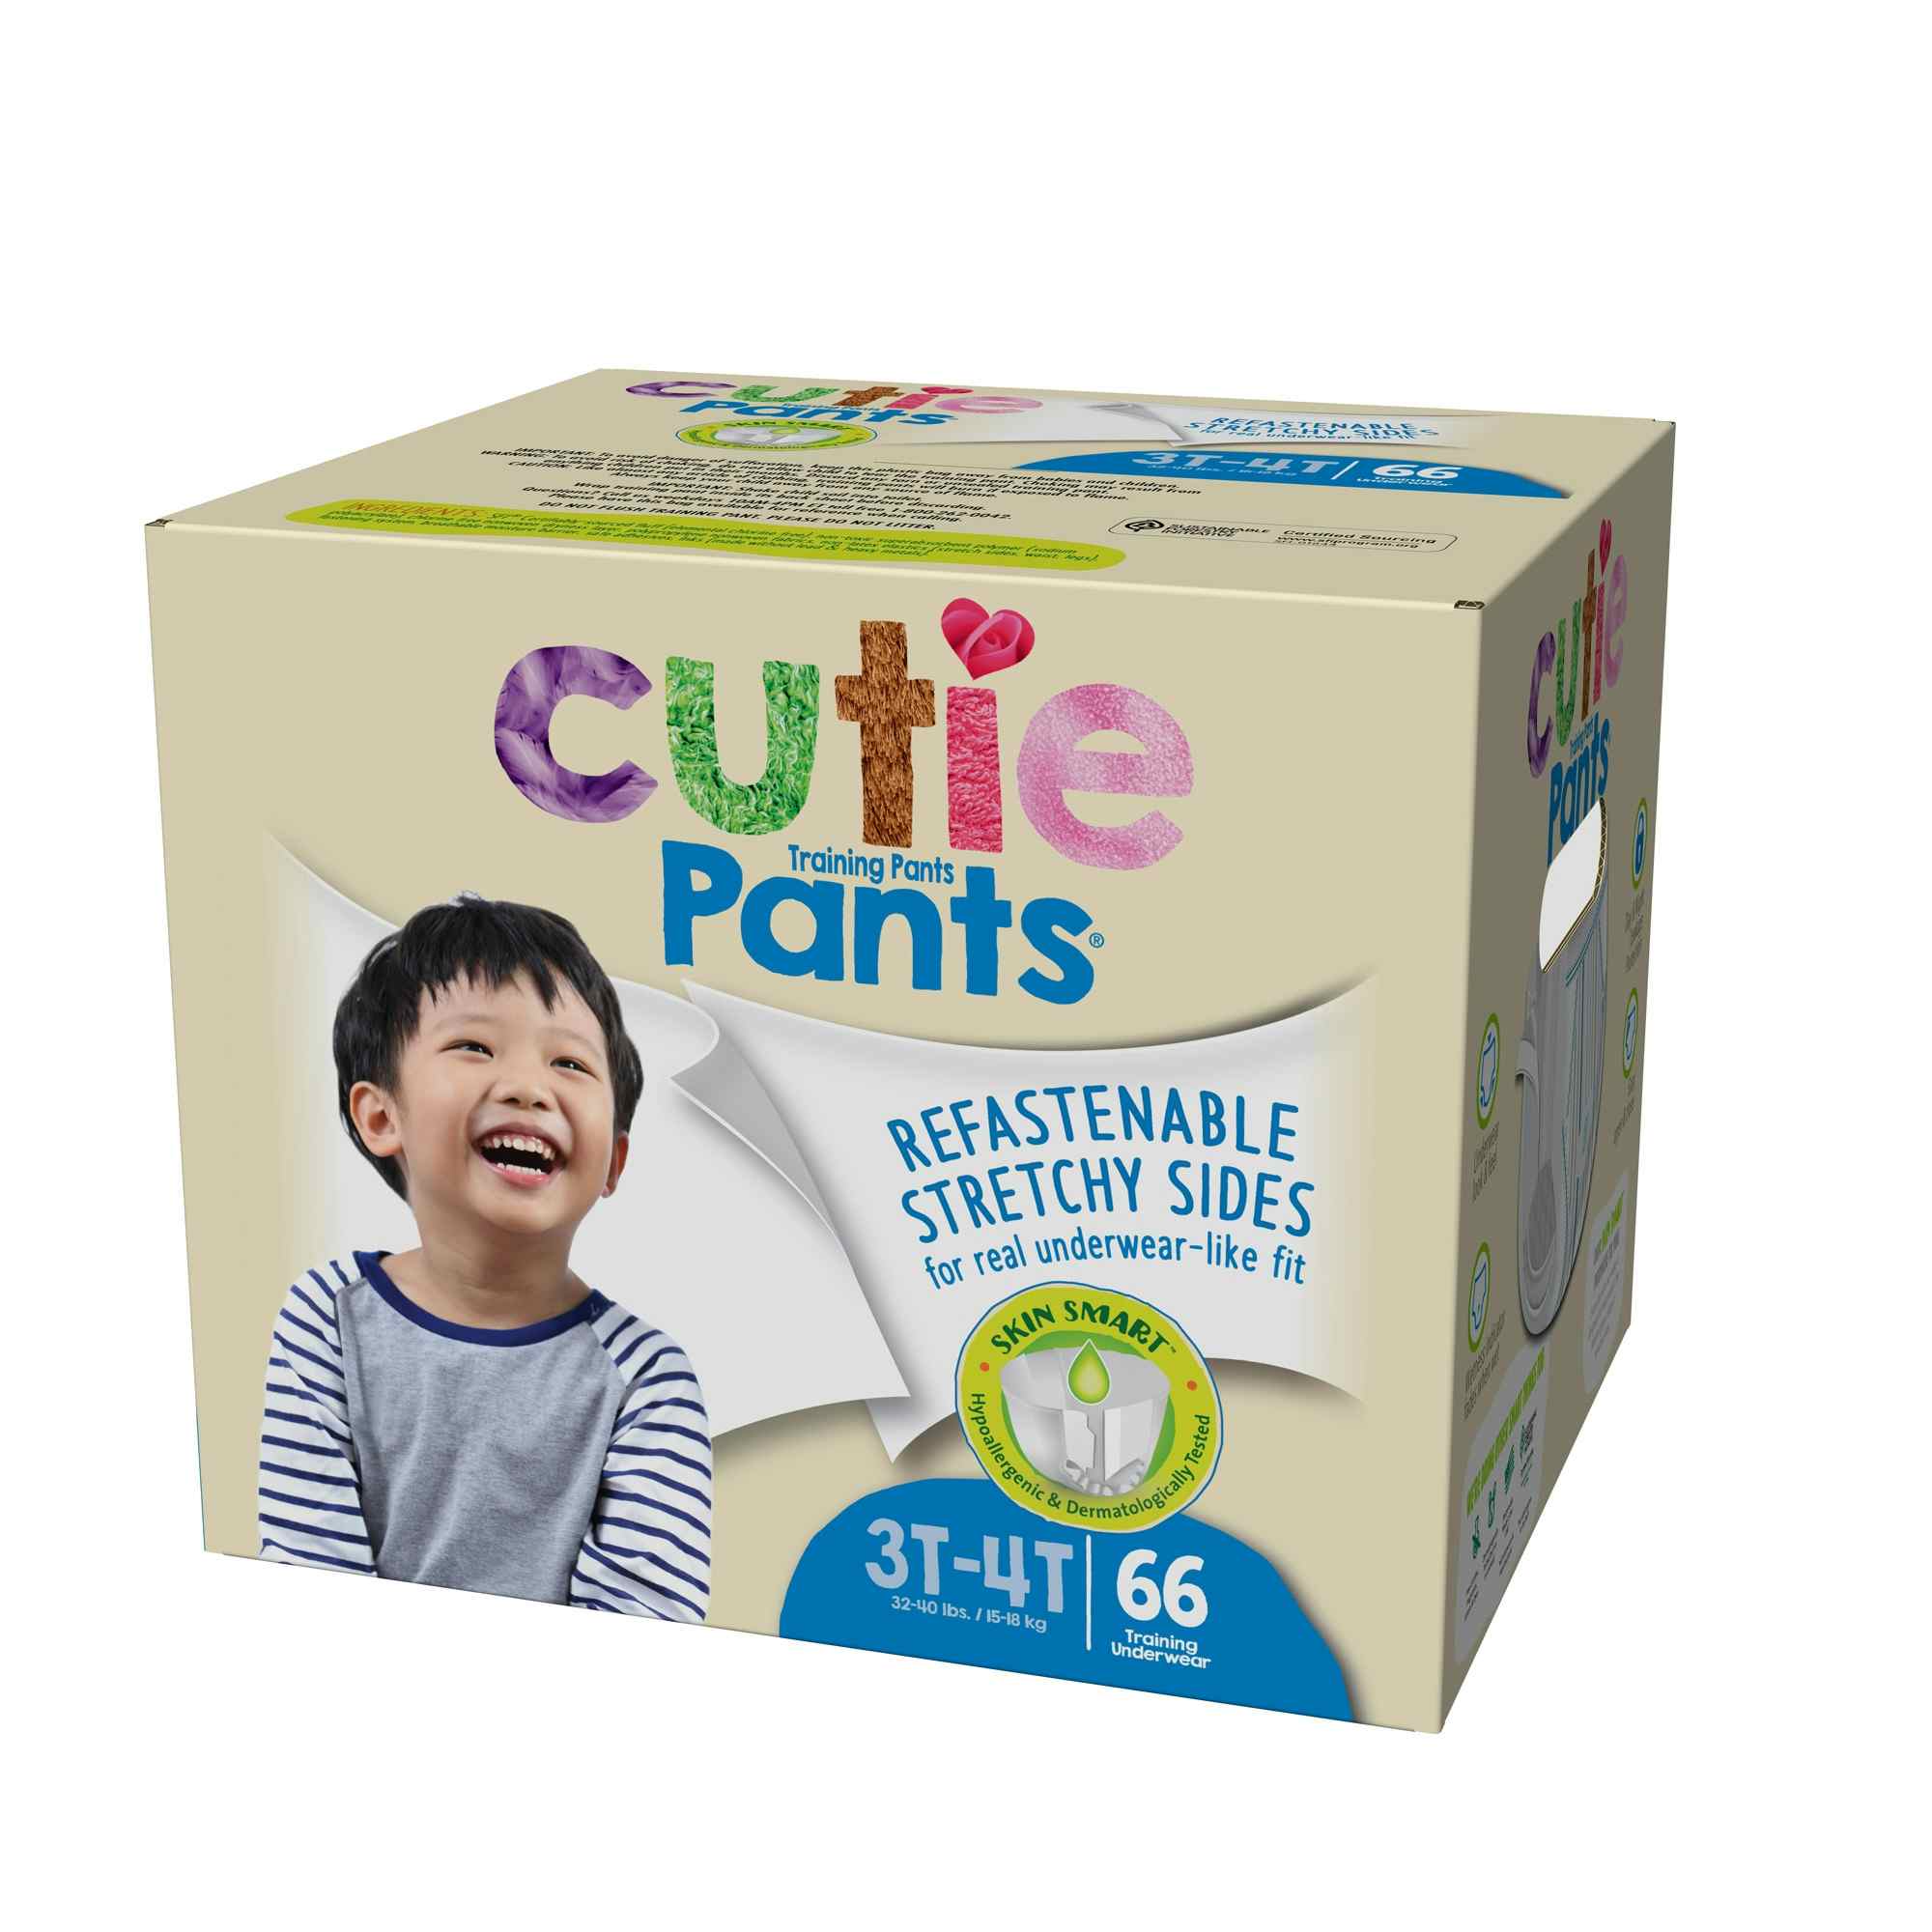 Cutie Pants Disposable Male Toddler Training Pants, Heavy, CR8007, Sea Animals, Size 3T-4T, 32-40 lbs - Bag of 23